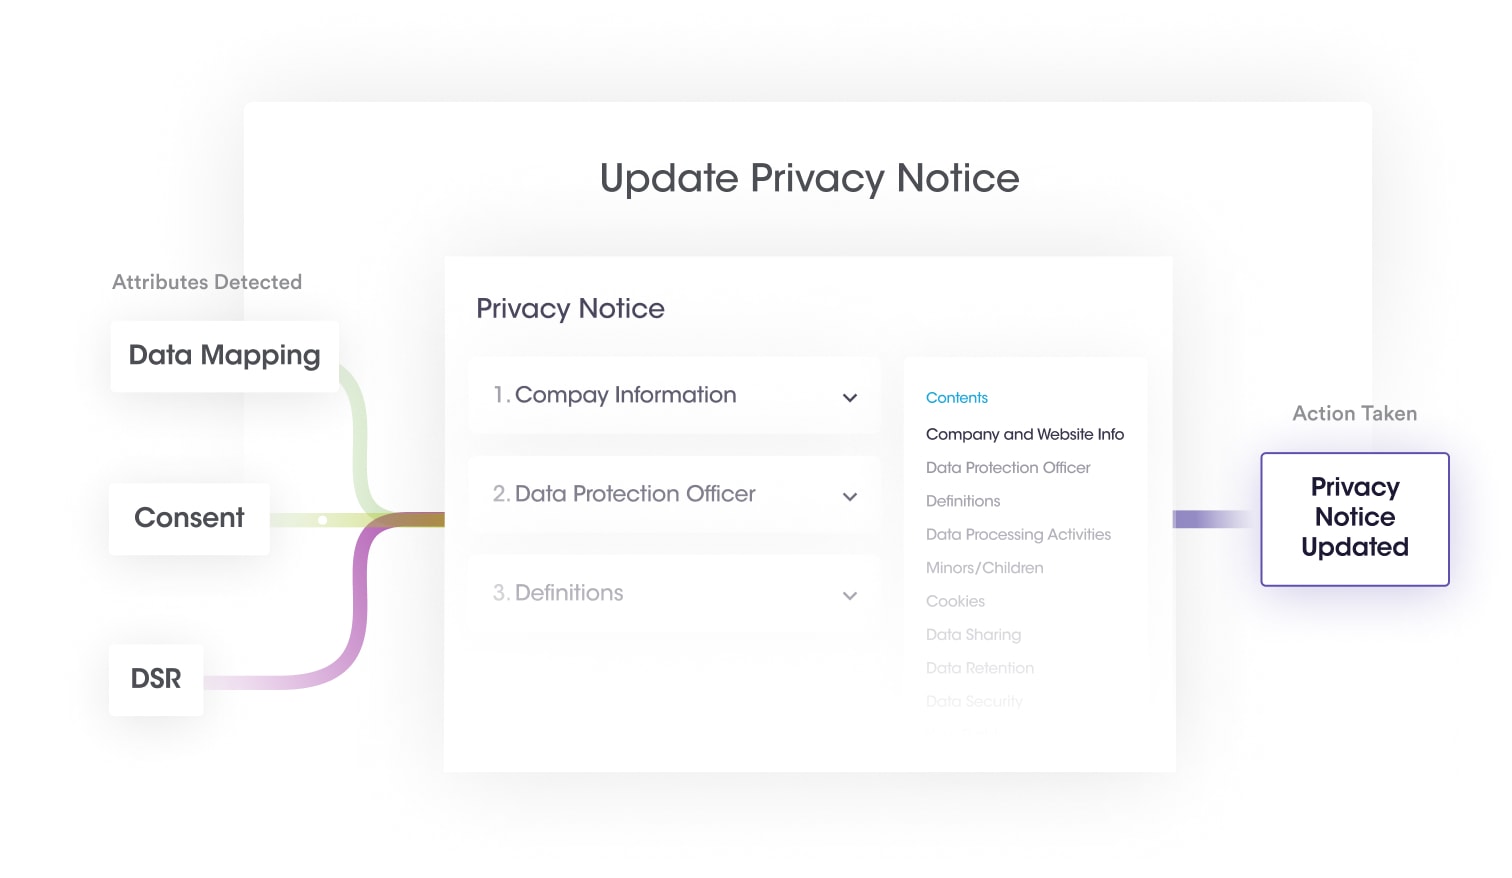 Dynamic Privacy Notices